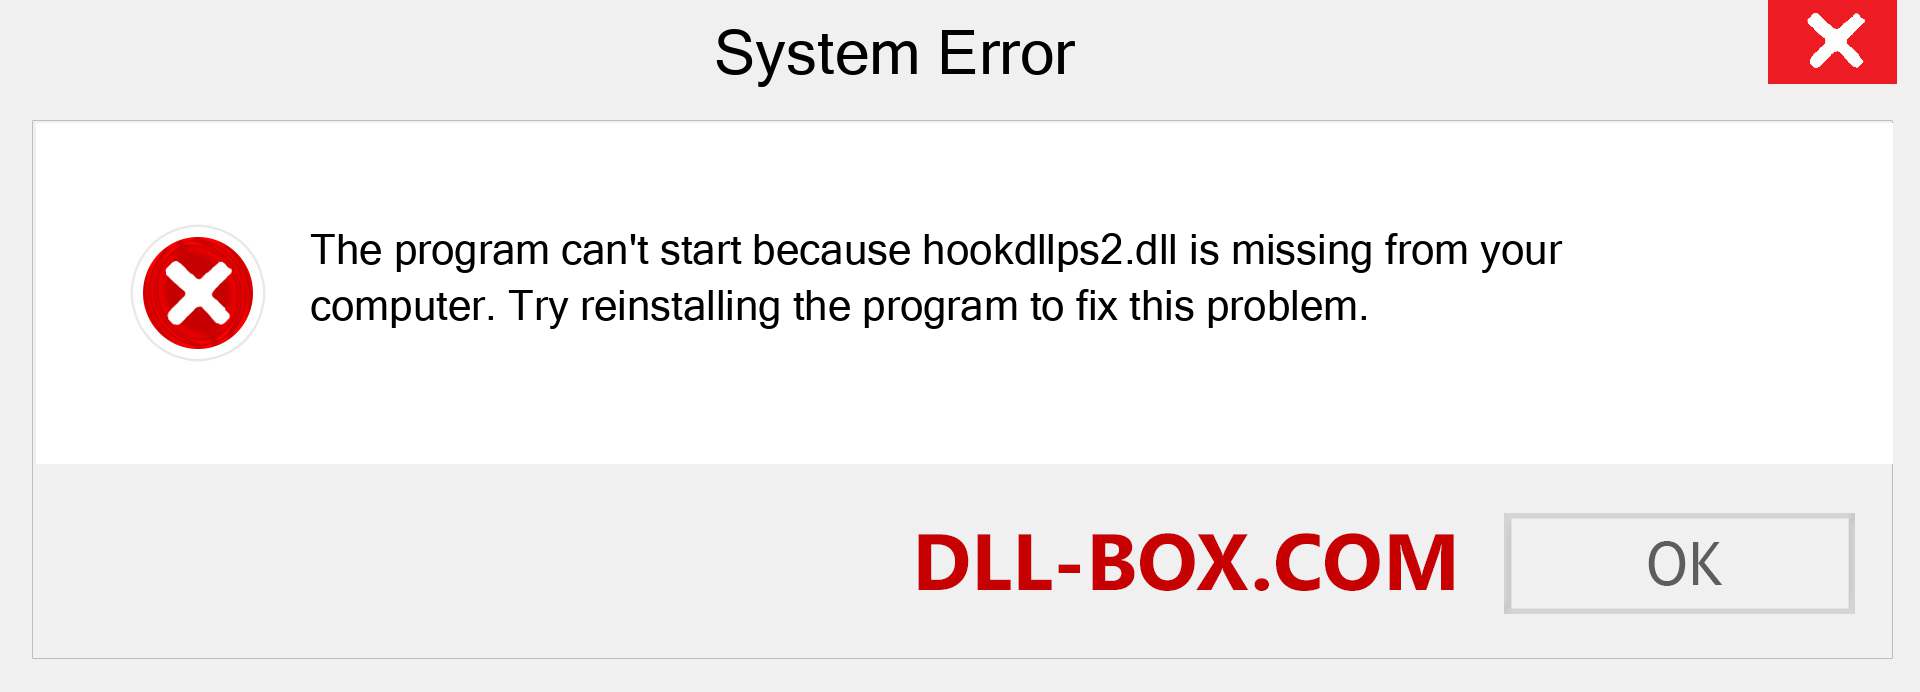  hookdllps2.dll file is missing?. Download for Windows 7, 8, 10 - Fix  hookdllps2 dll Missing Error on Windows, photos, images